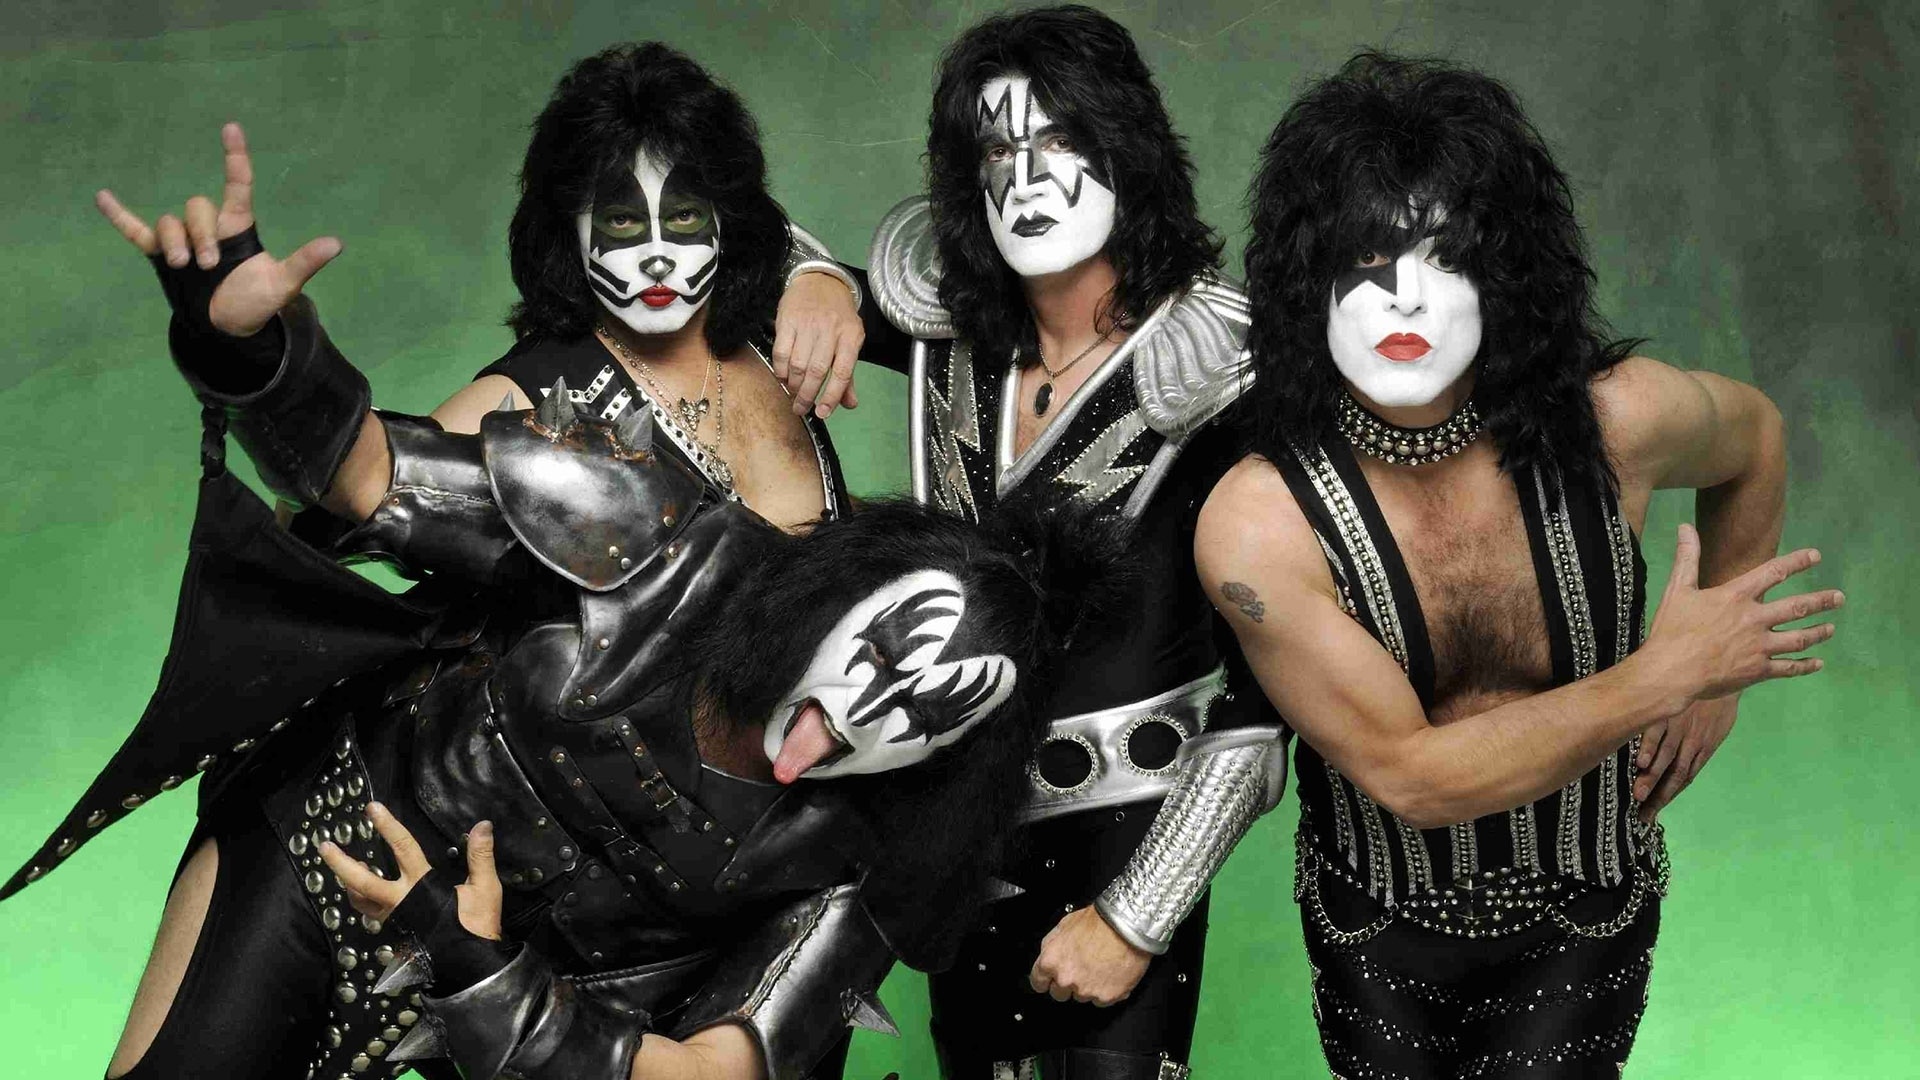 Kiss Band Wallpaper Hd posted by Sarah Thompson 1920x1080